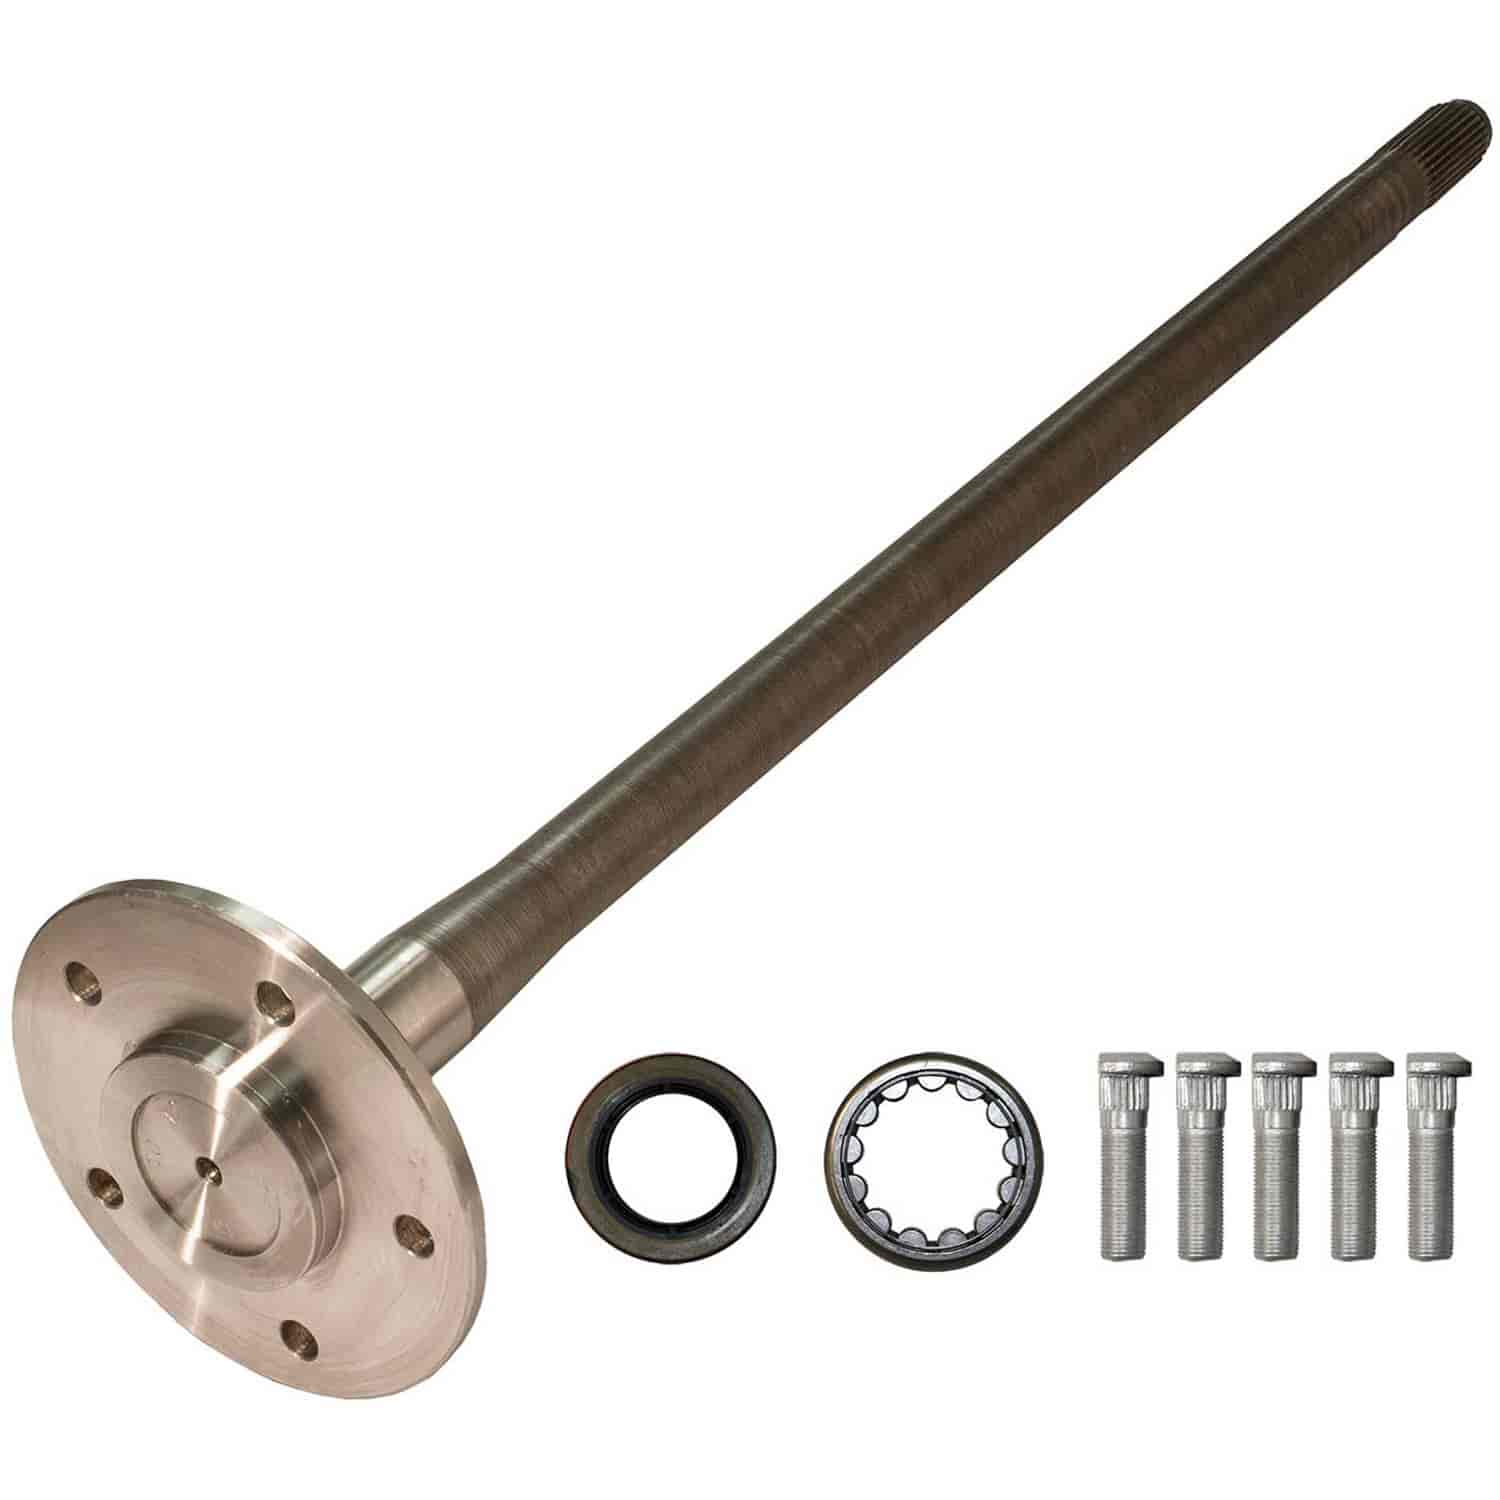 Rear Right Axle Kit 1983-1986 Ford Bronco/F-150 Includes Axle, Bearing, Seal, Studs